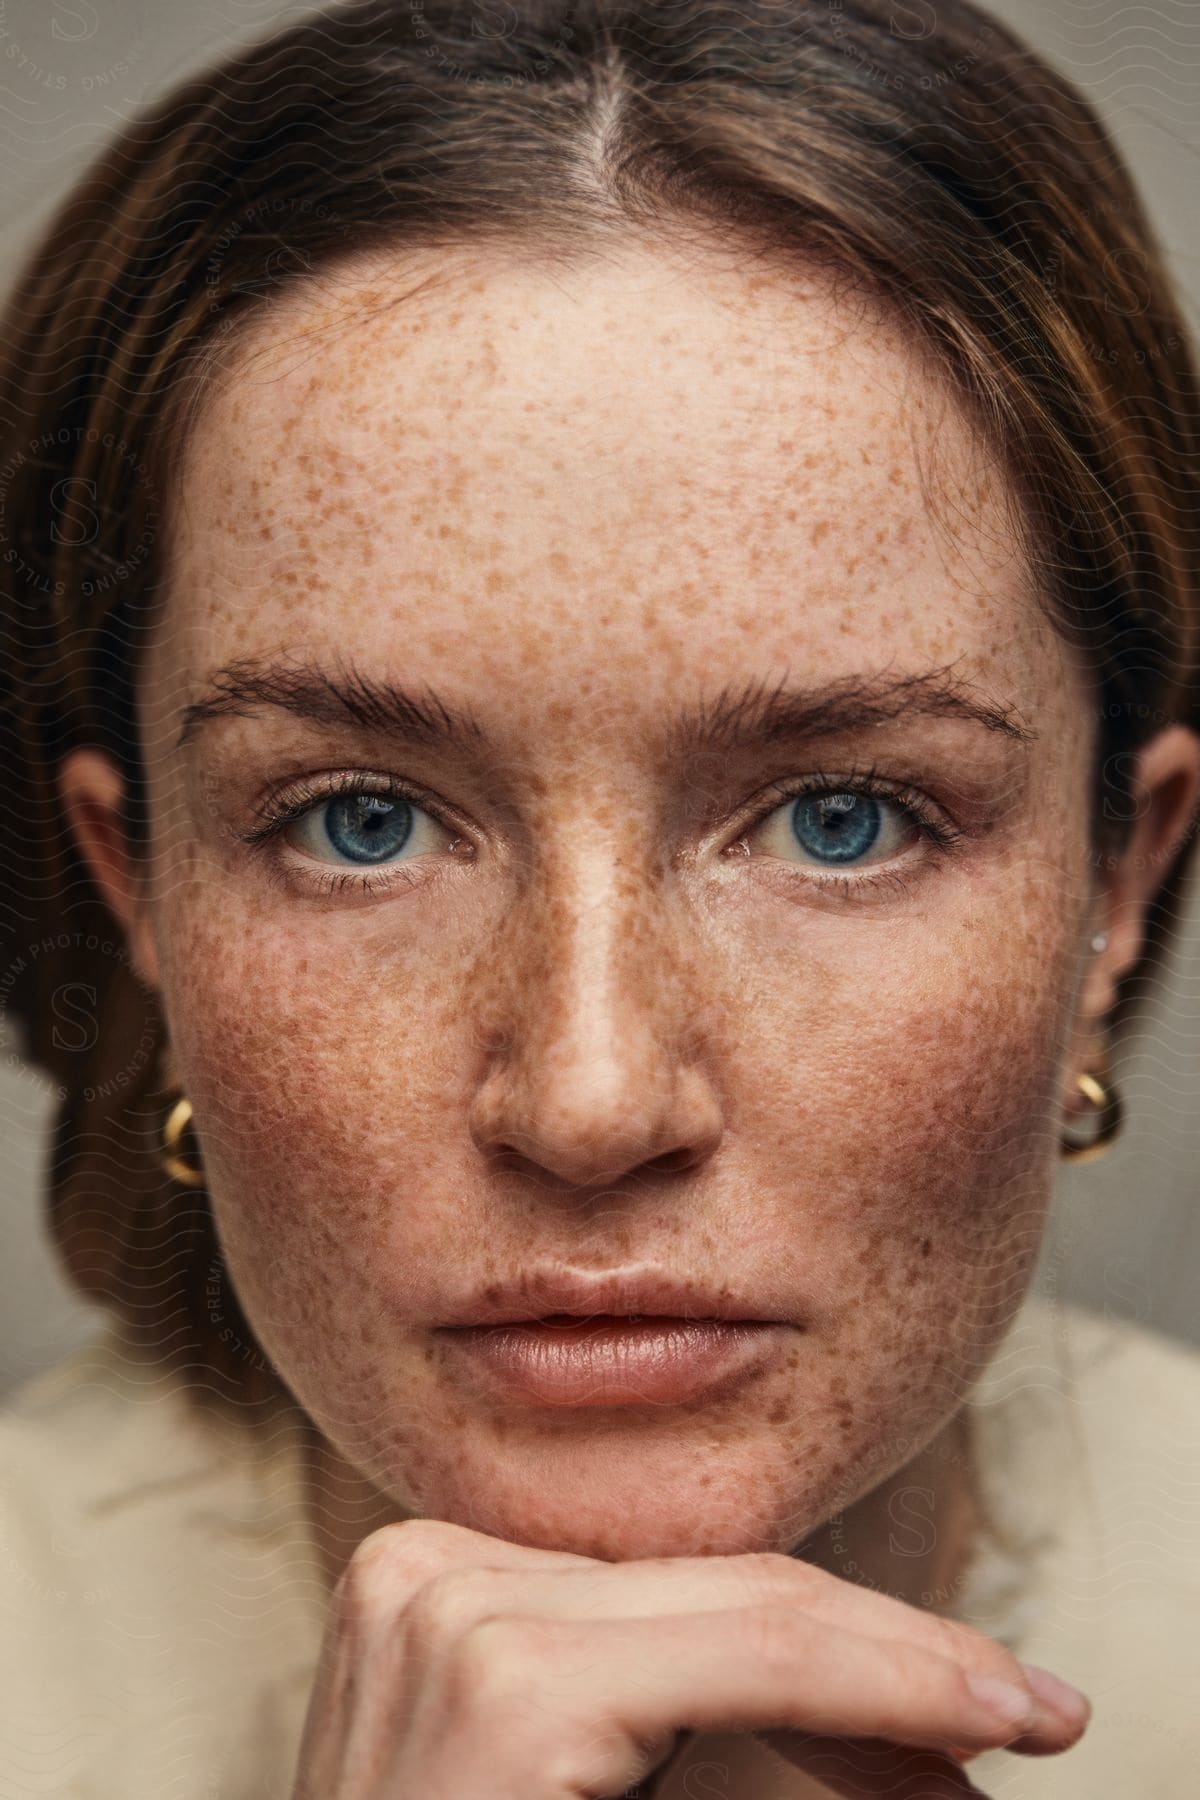 A neutralfaced adult woman with freckles